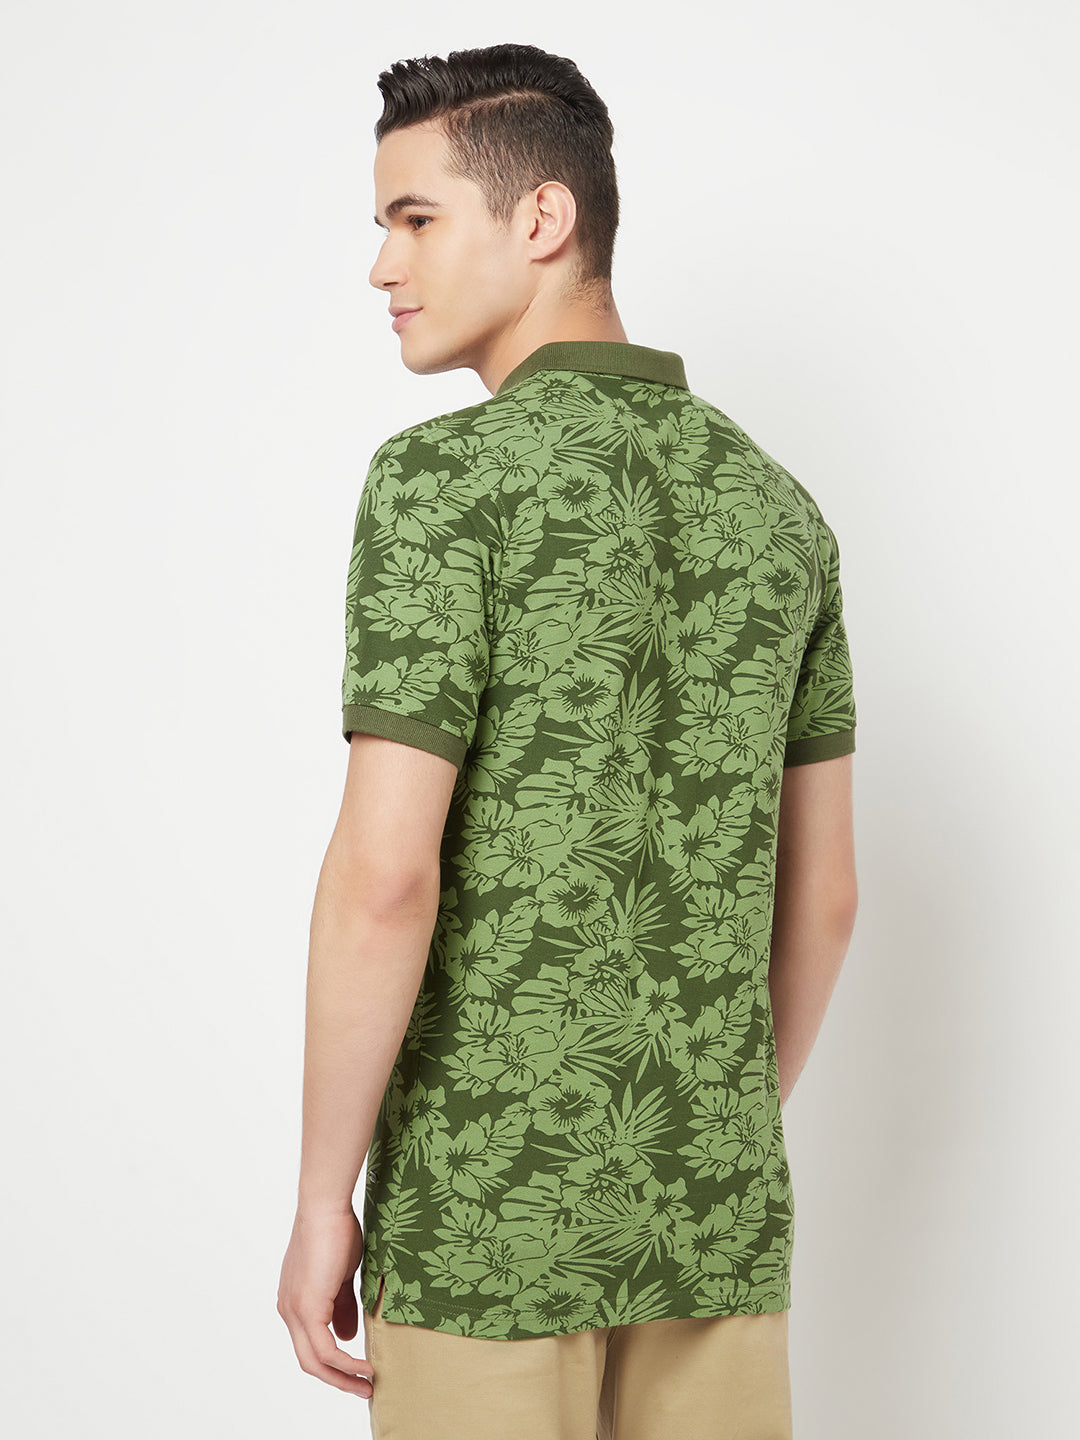 Olive Floral Printed Polo T-Shirt - Men T-Shirts